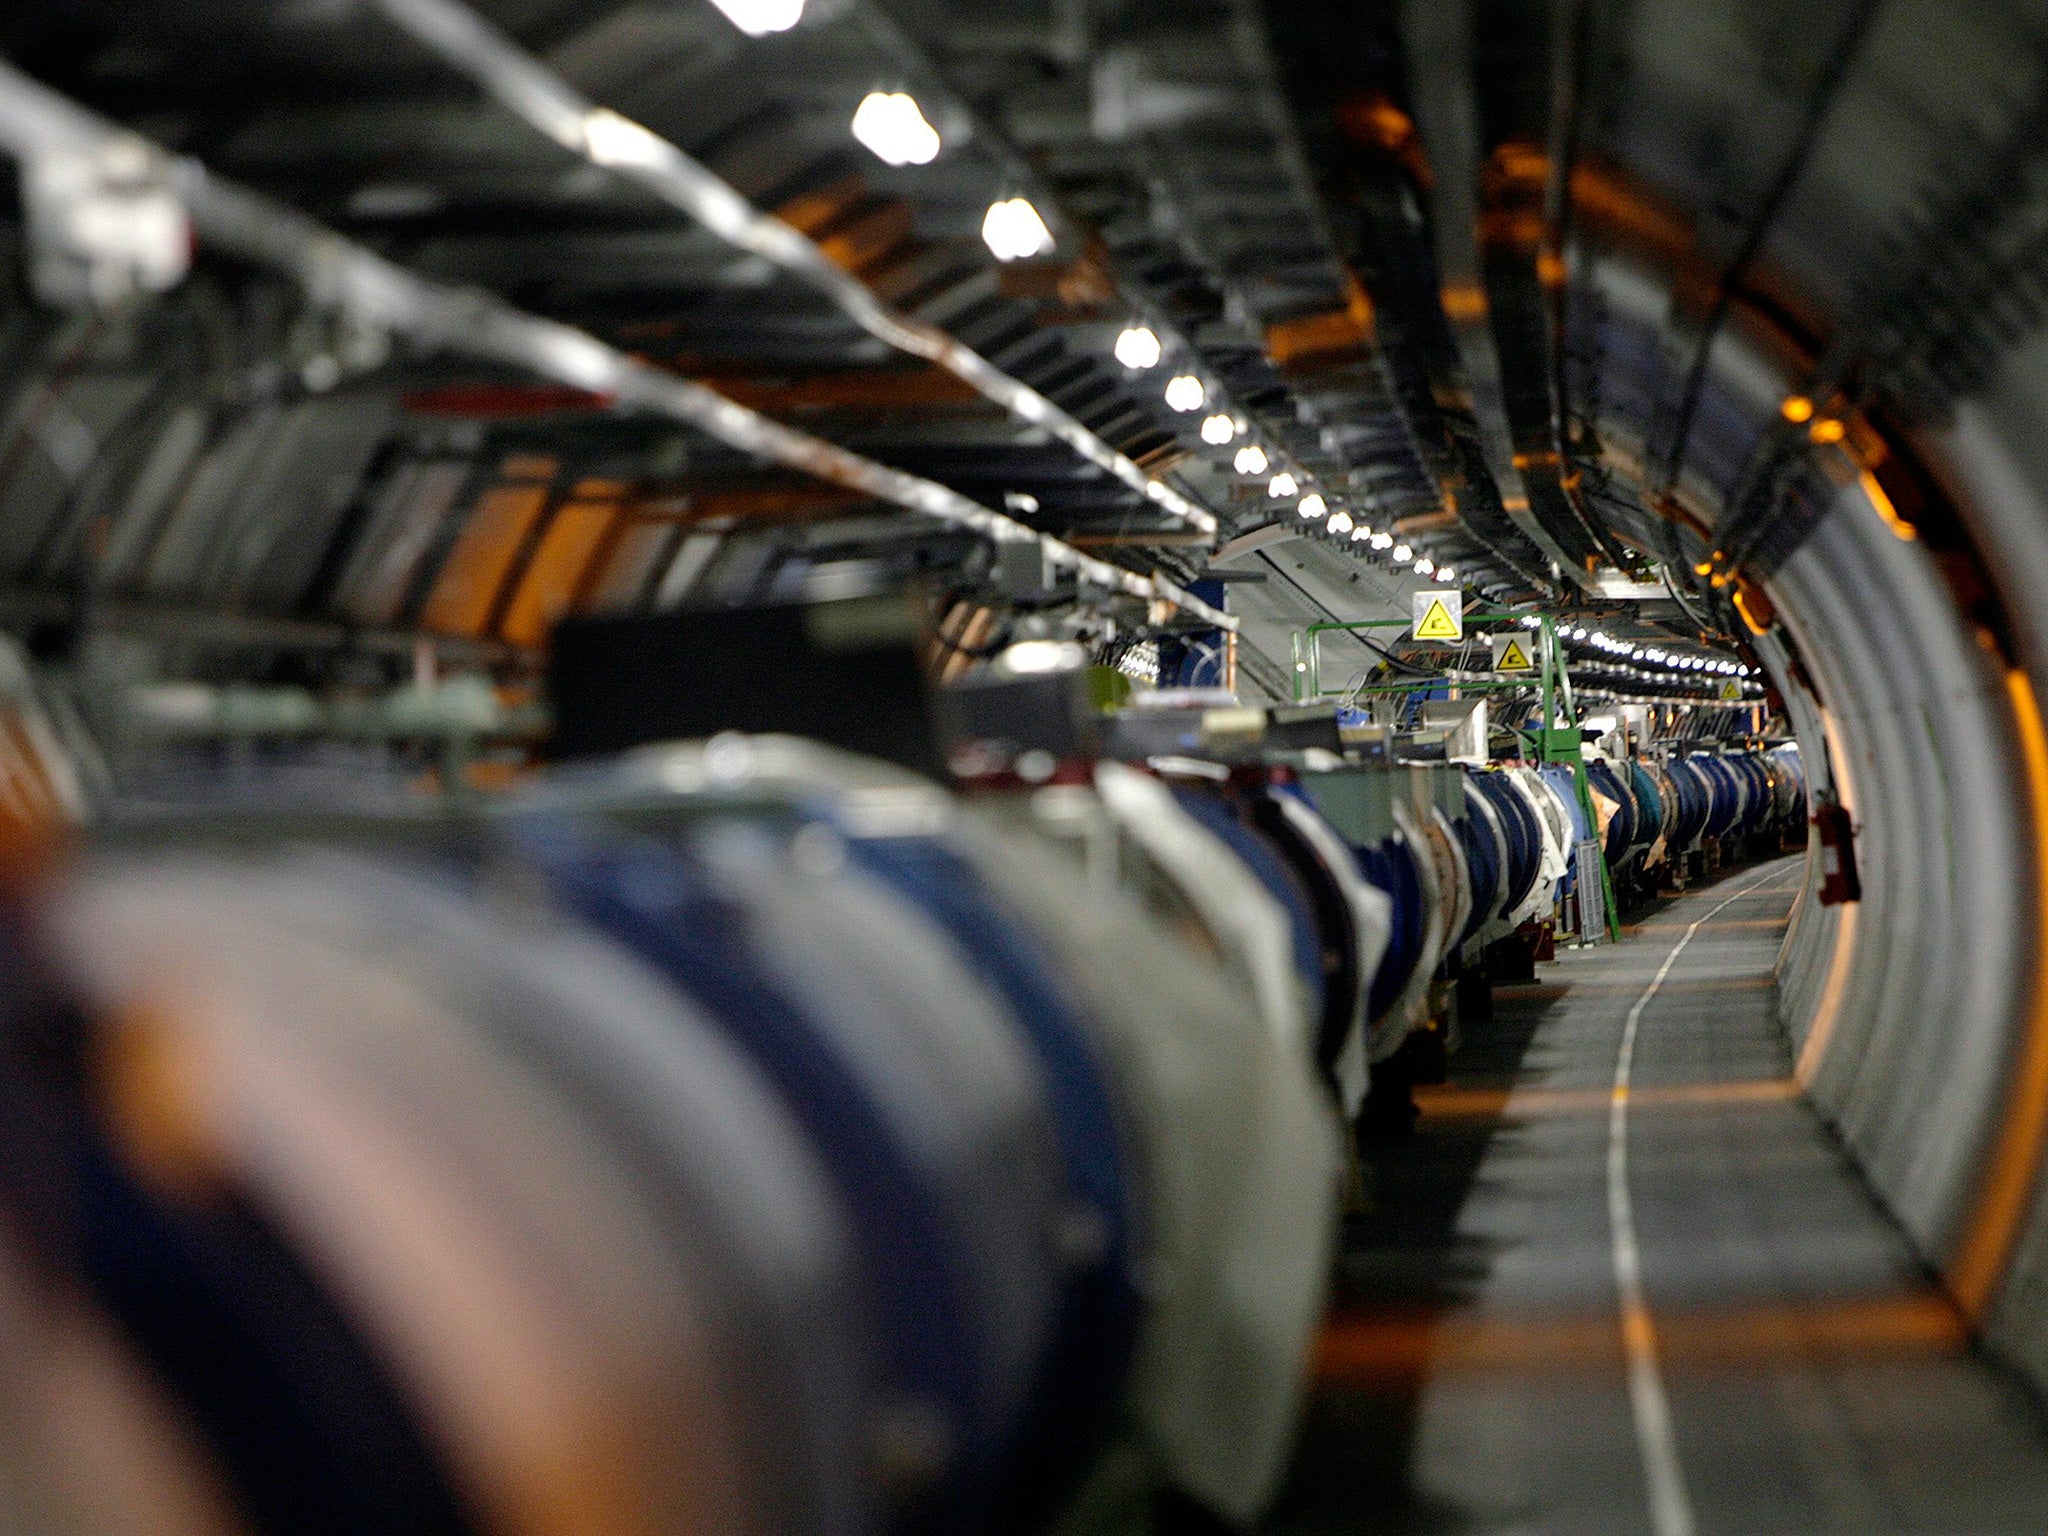 The Large Hadron Collider at the European Organisation for Nuclear Research (Cern) in Geneva